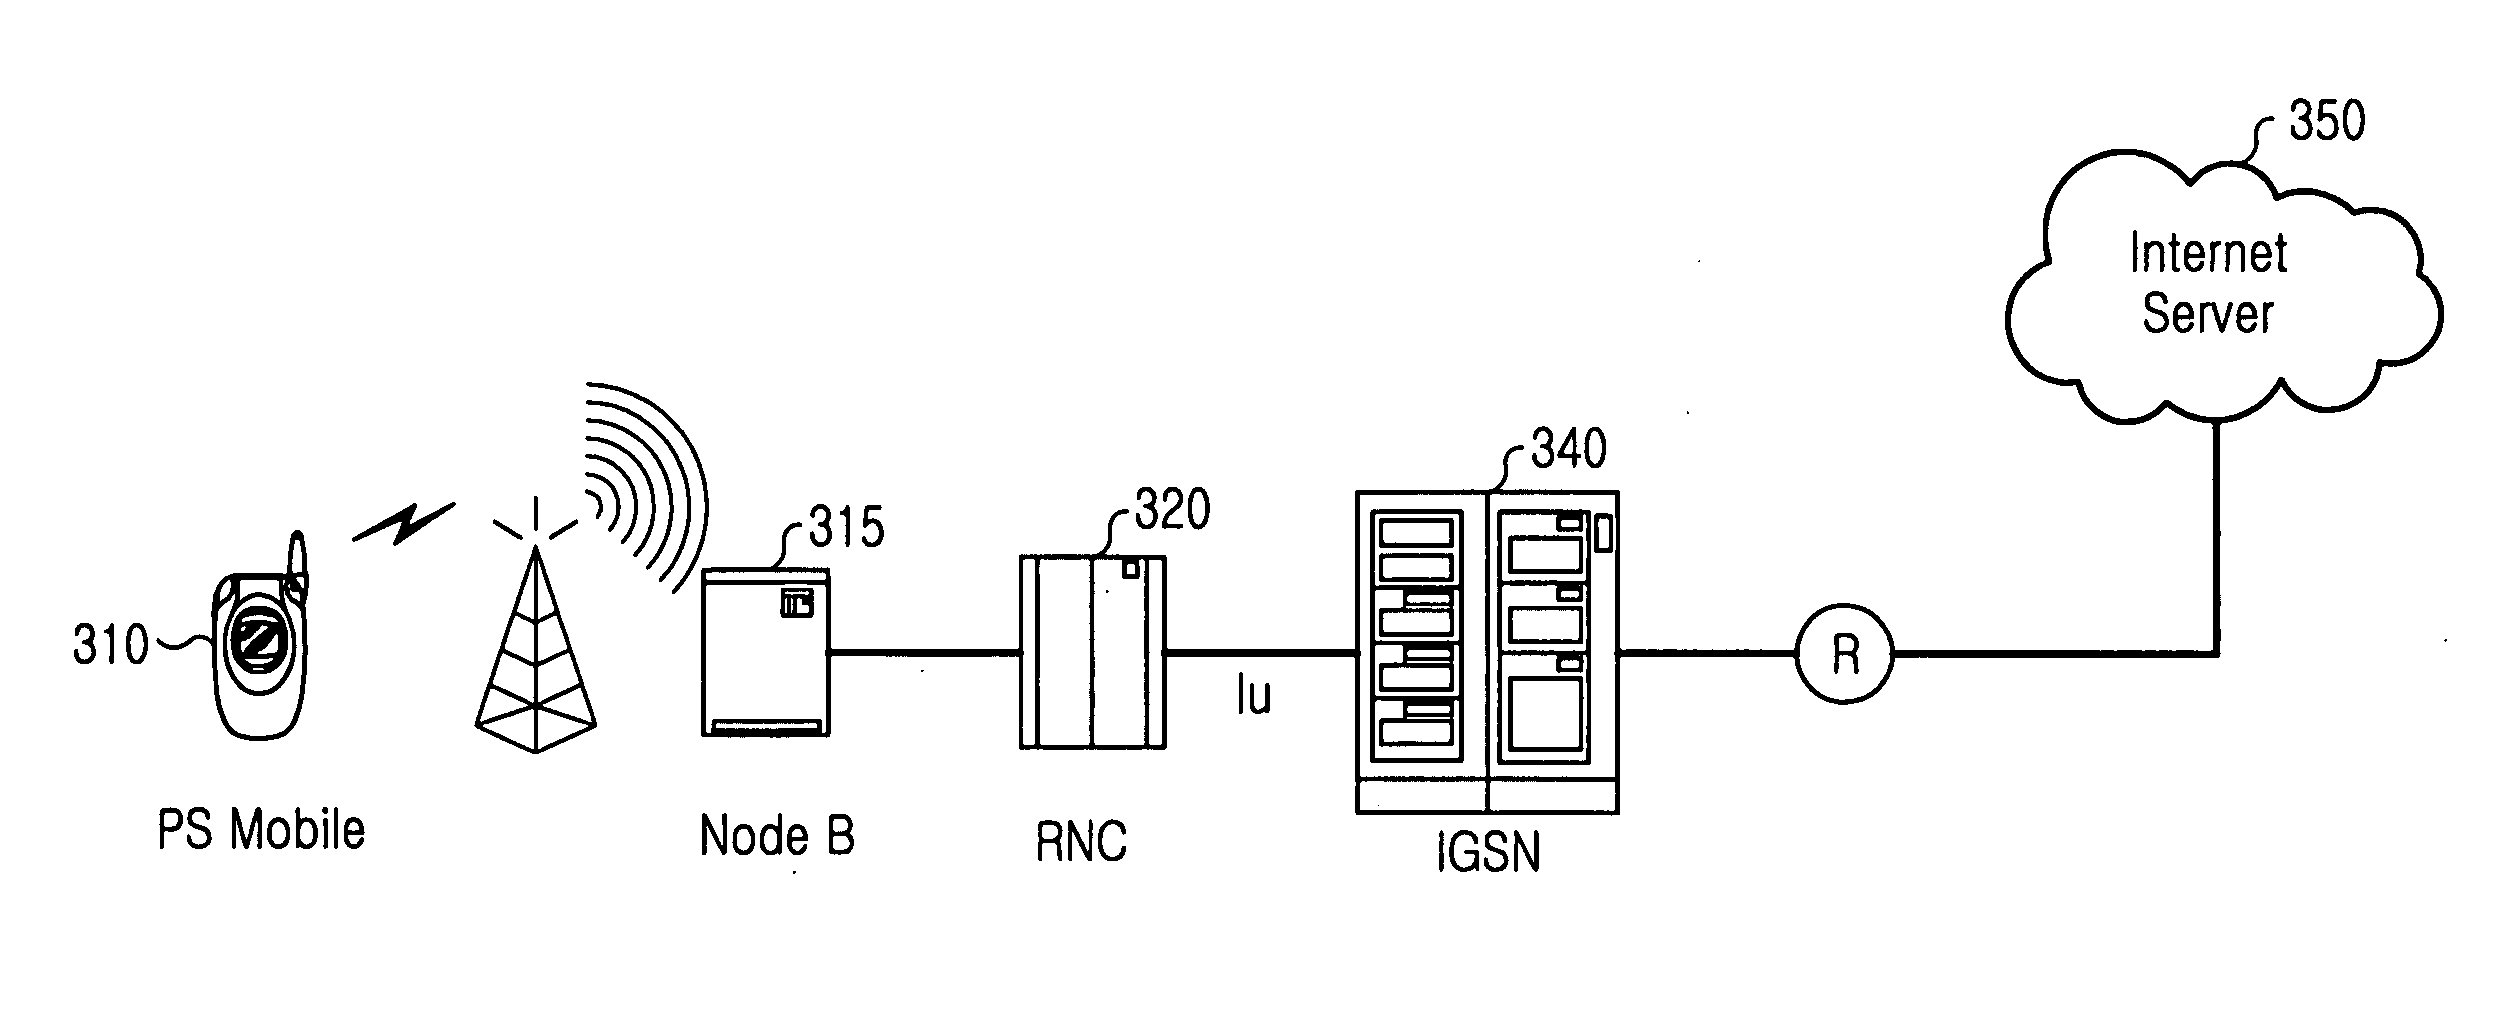 Apparatus and method for producing a tunnel in an integrated serving general packet radio service (GPRS) service node (SGSN) and gateway GPRS support node (GGSN) in a universal mobile telecommunication service (UMTS) network